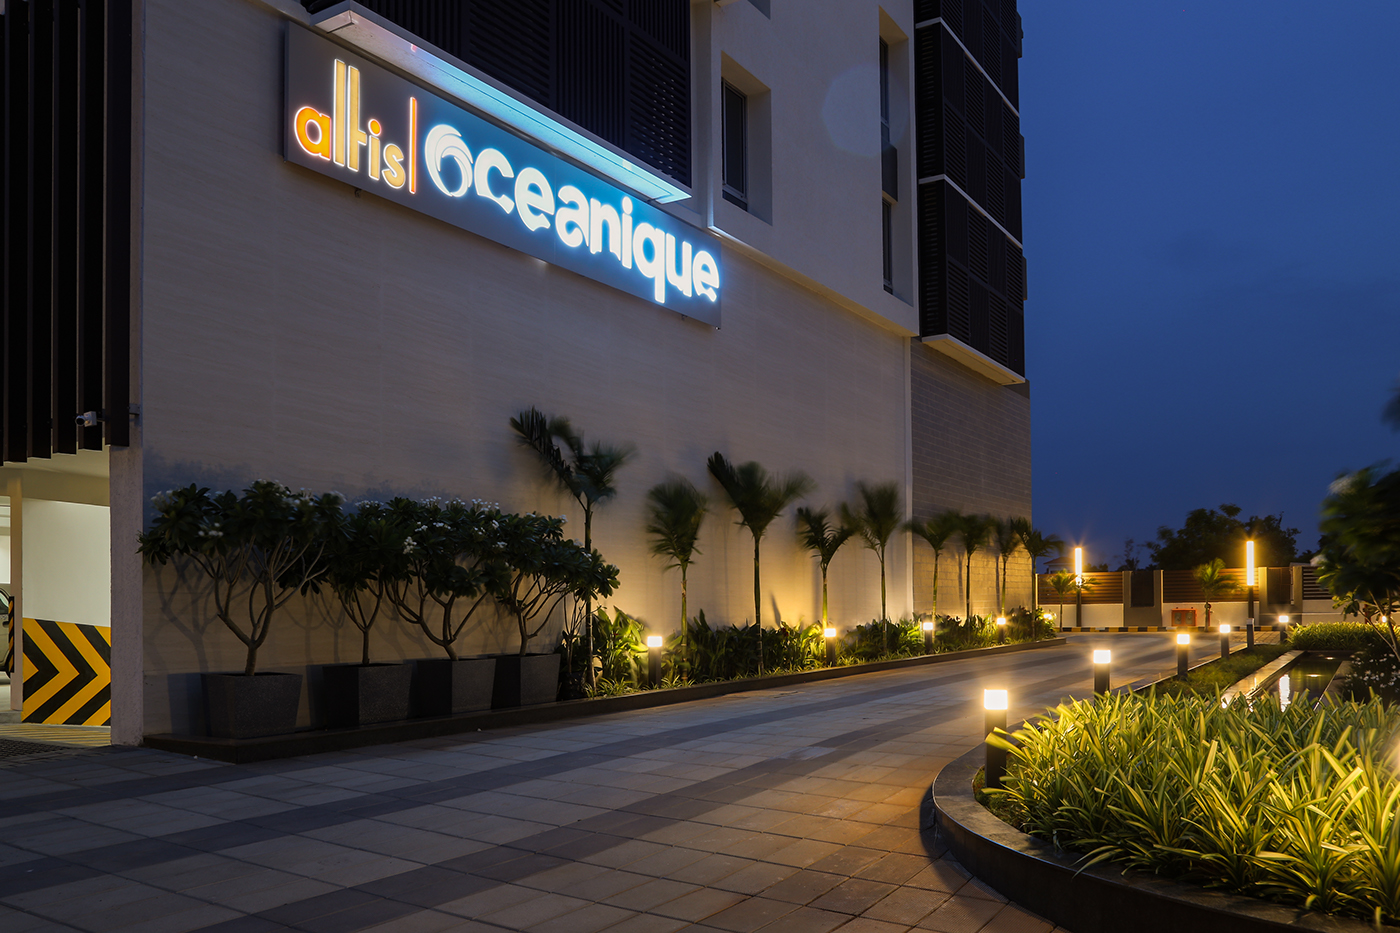 Oceanique ecr chennai luxury apartments highrise terrace landscaping night